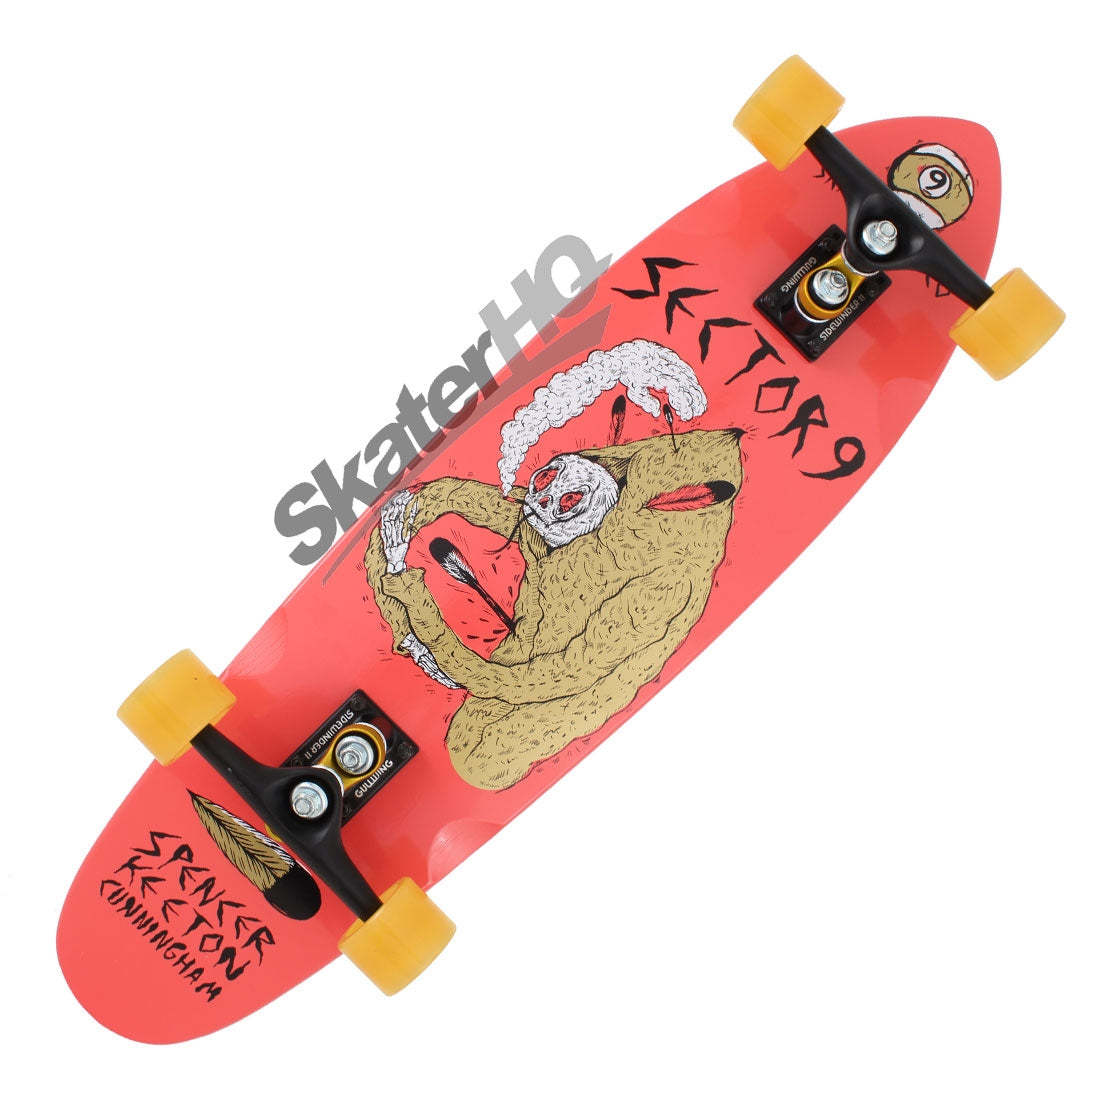 Sector 9 SKC Downfall 34 Complete Skateboard Compl Cruisers